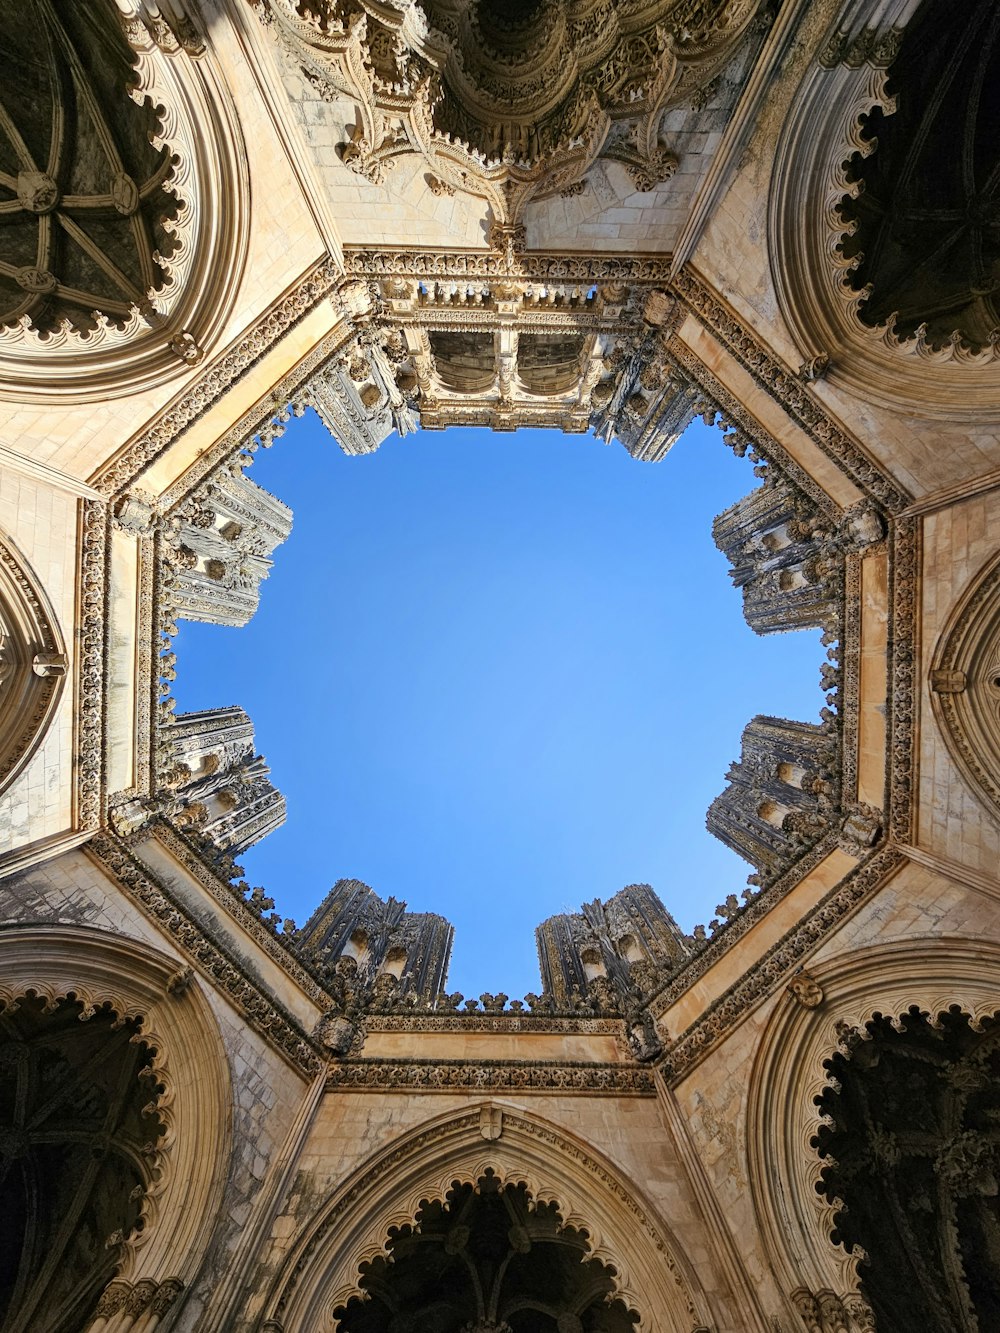 looking up at the ceiling of a cathedral